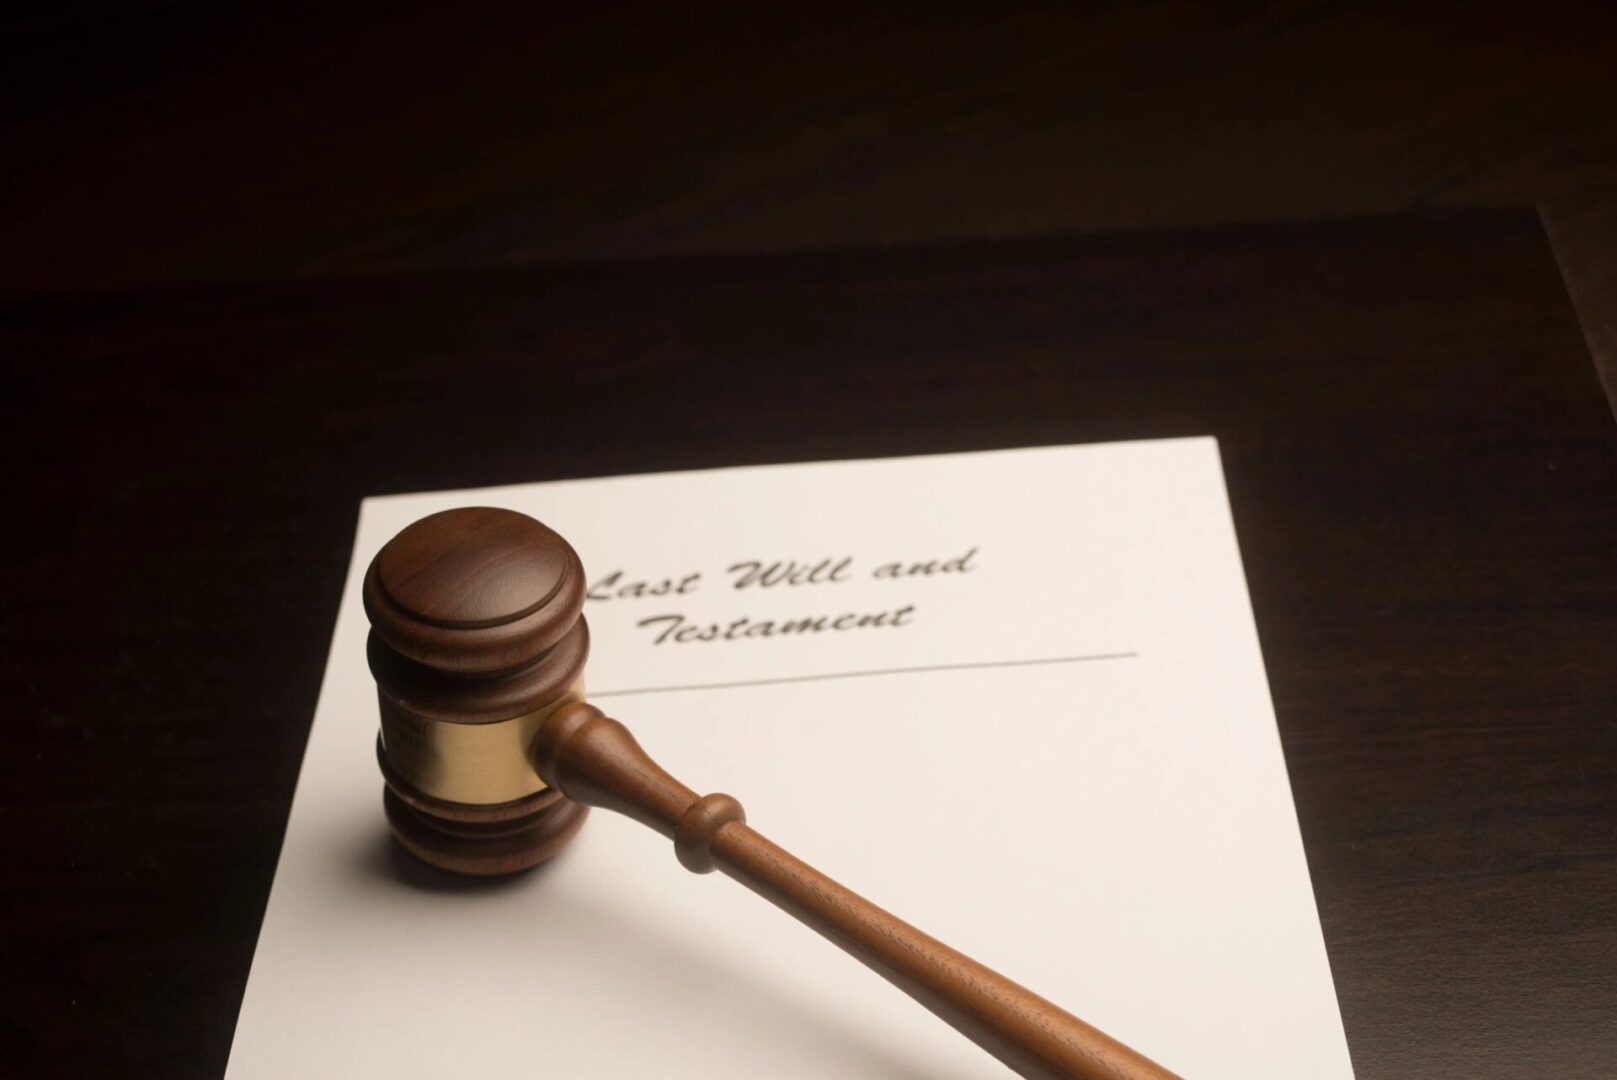 A wooden gavel sitting on top of a white paper.